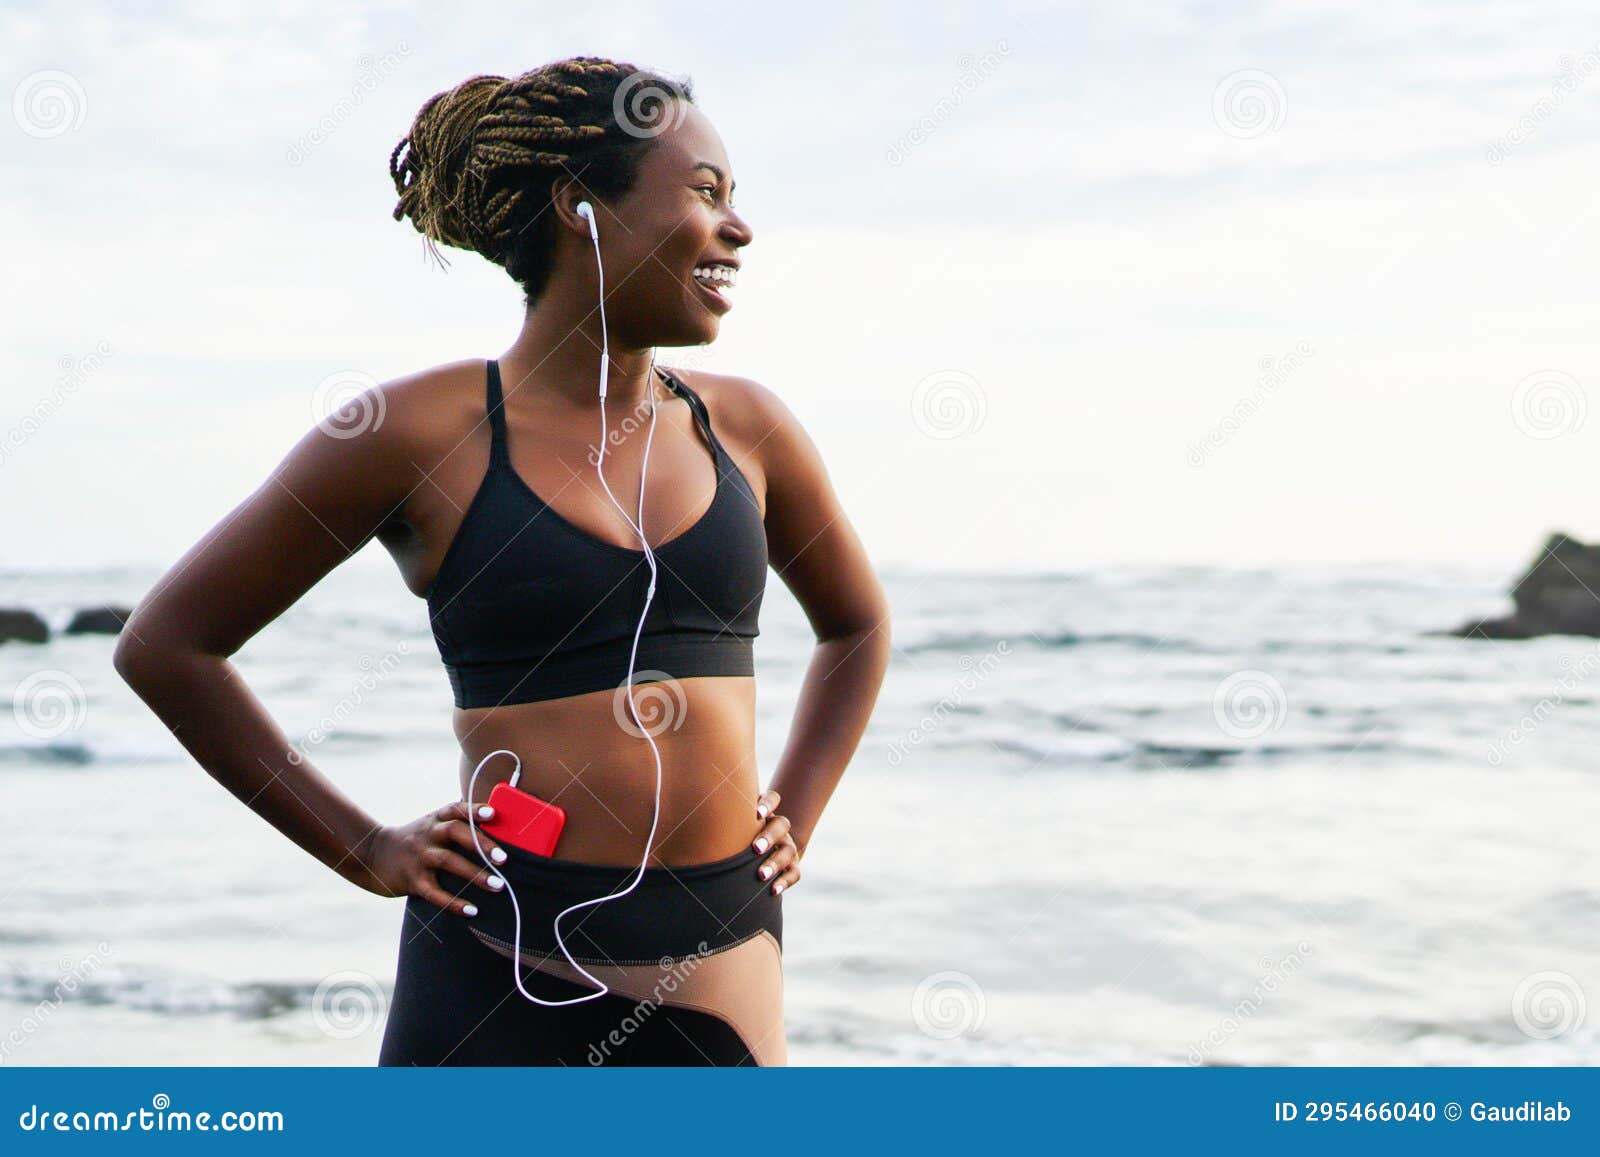 Woman in black sports bra and track pants running at beach HD